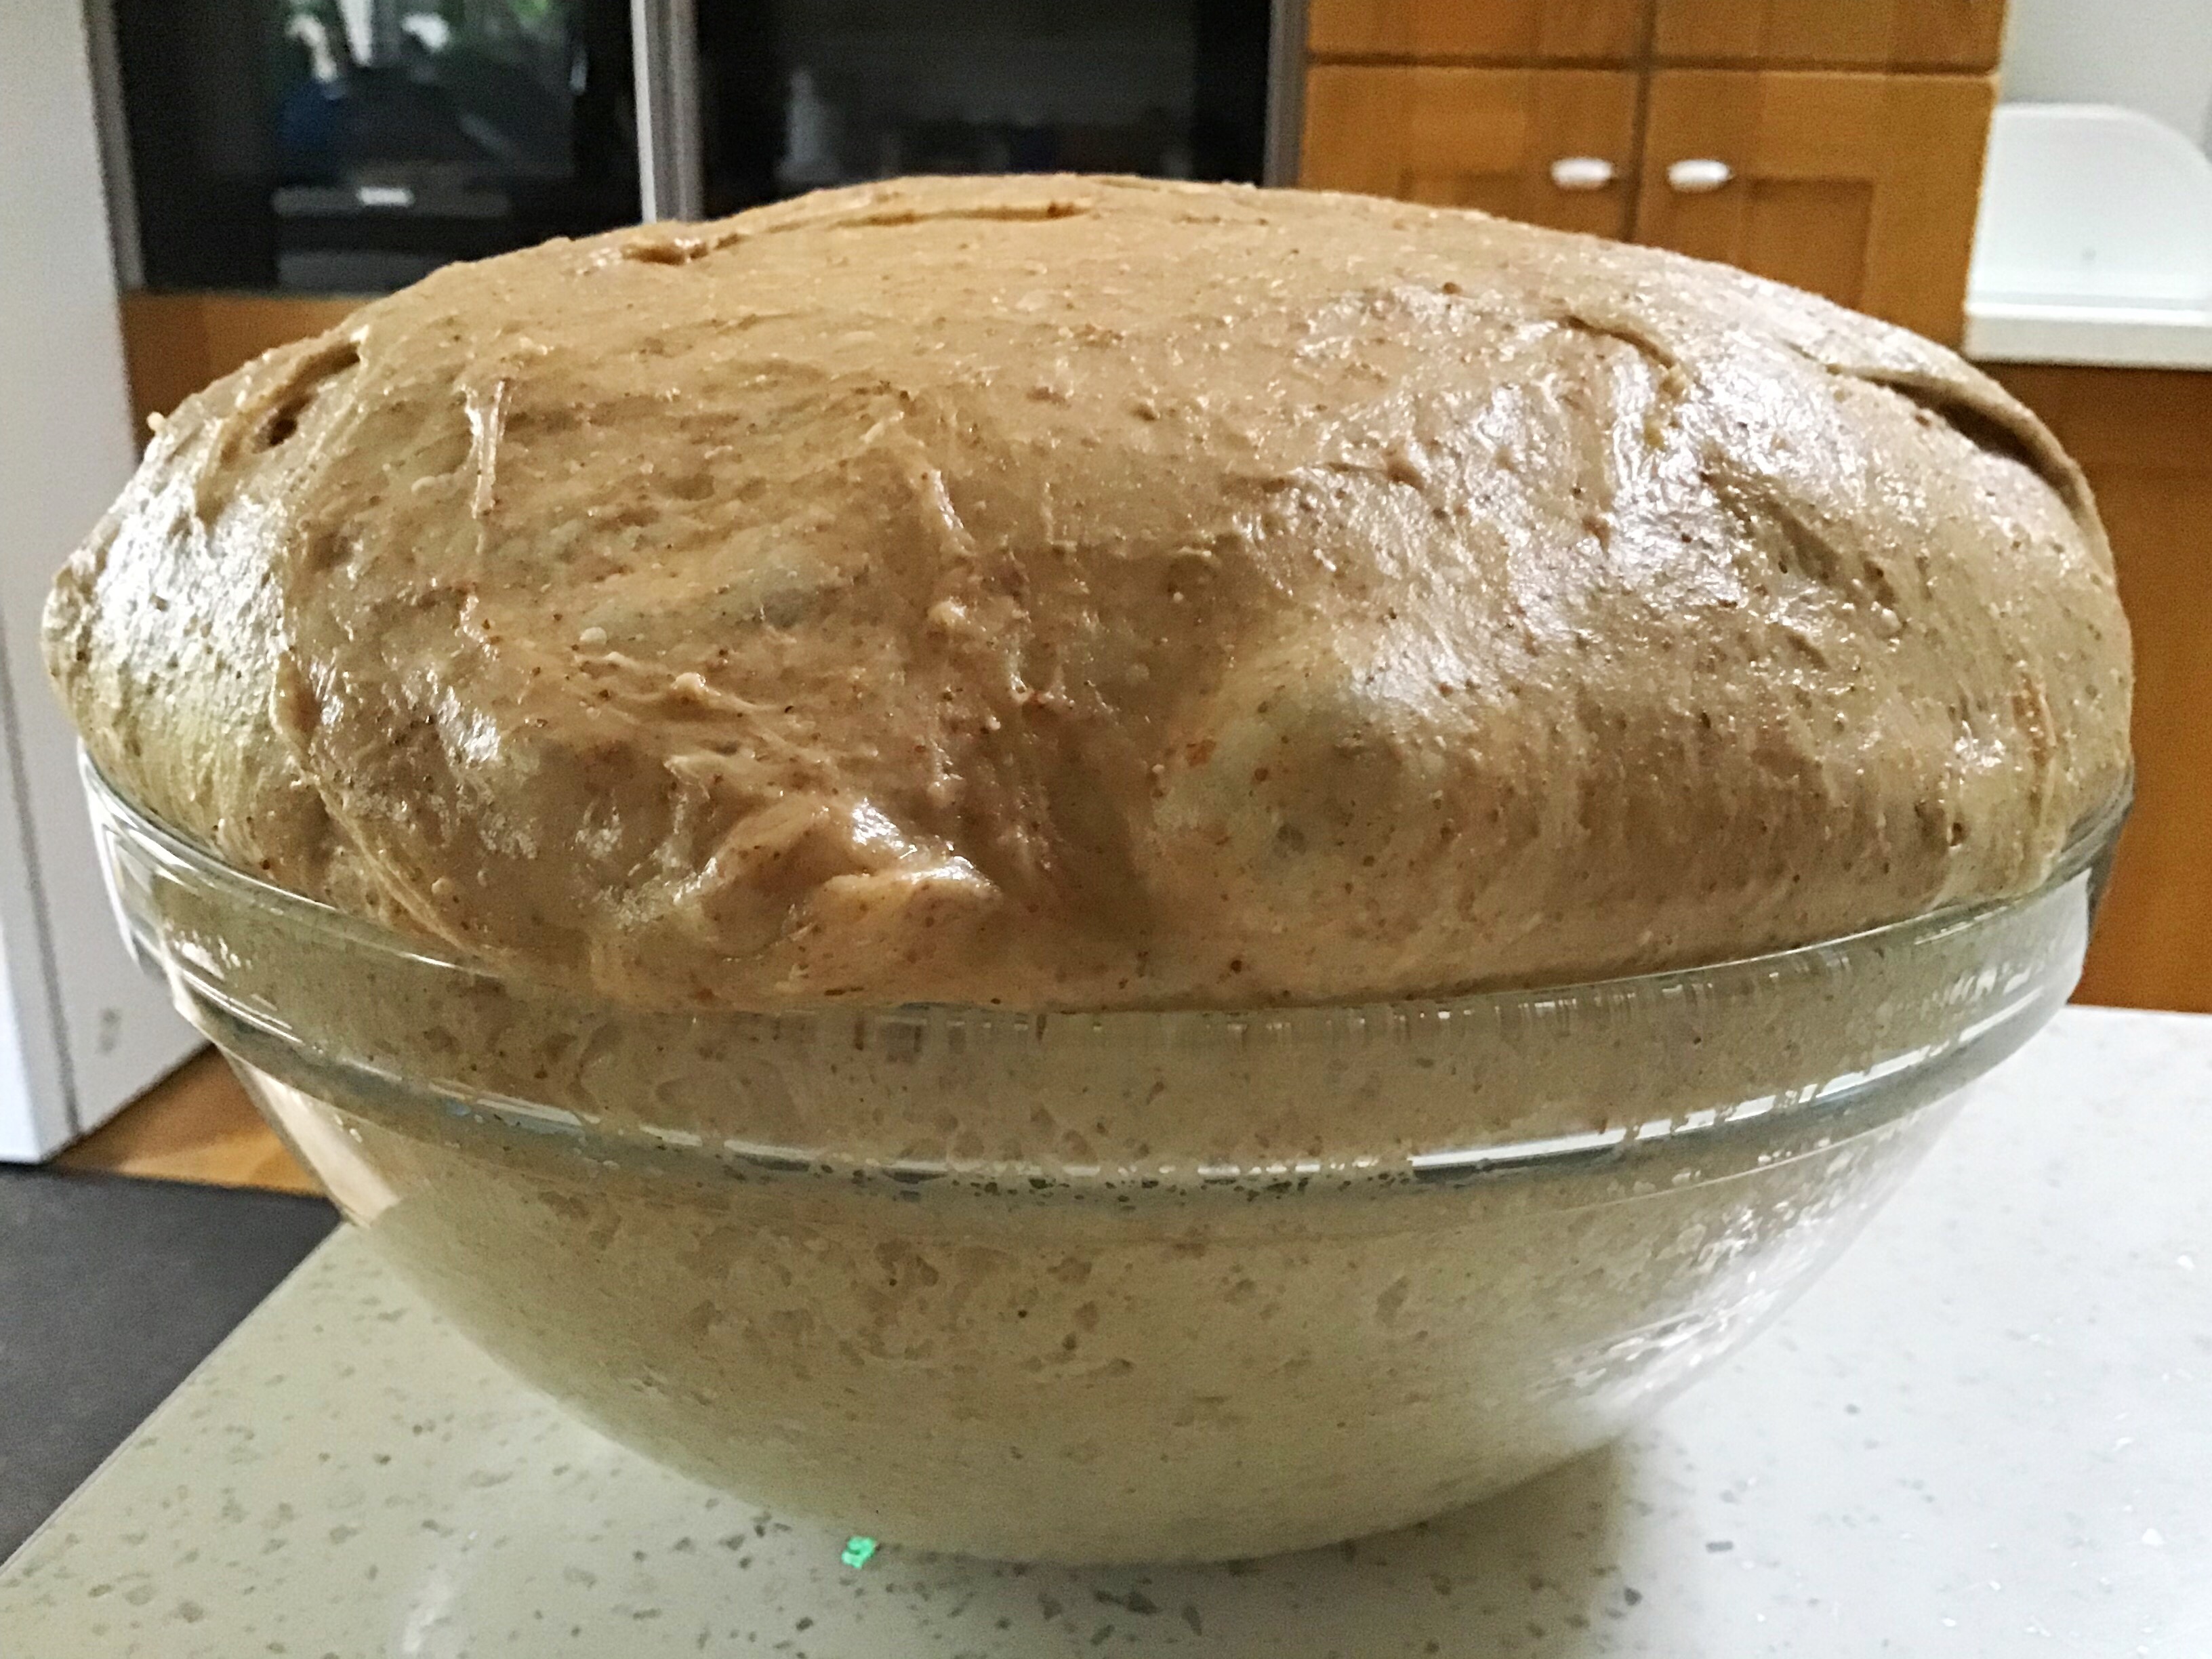 A bowl of bread sitting on top of a table.